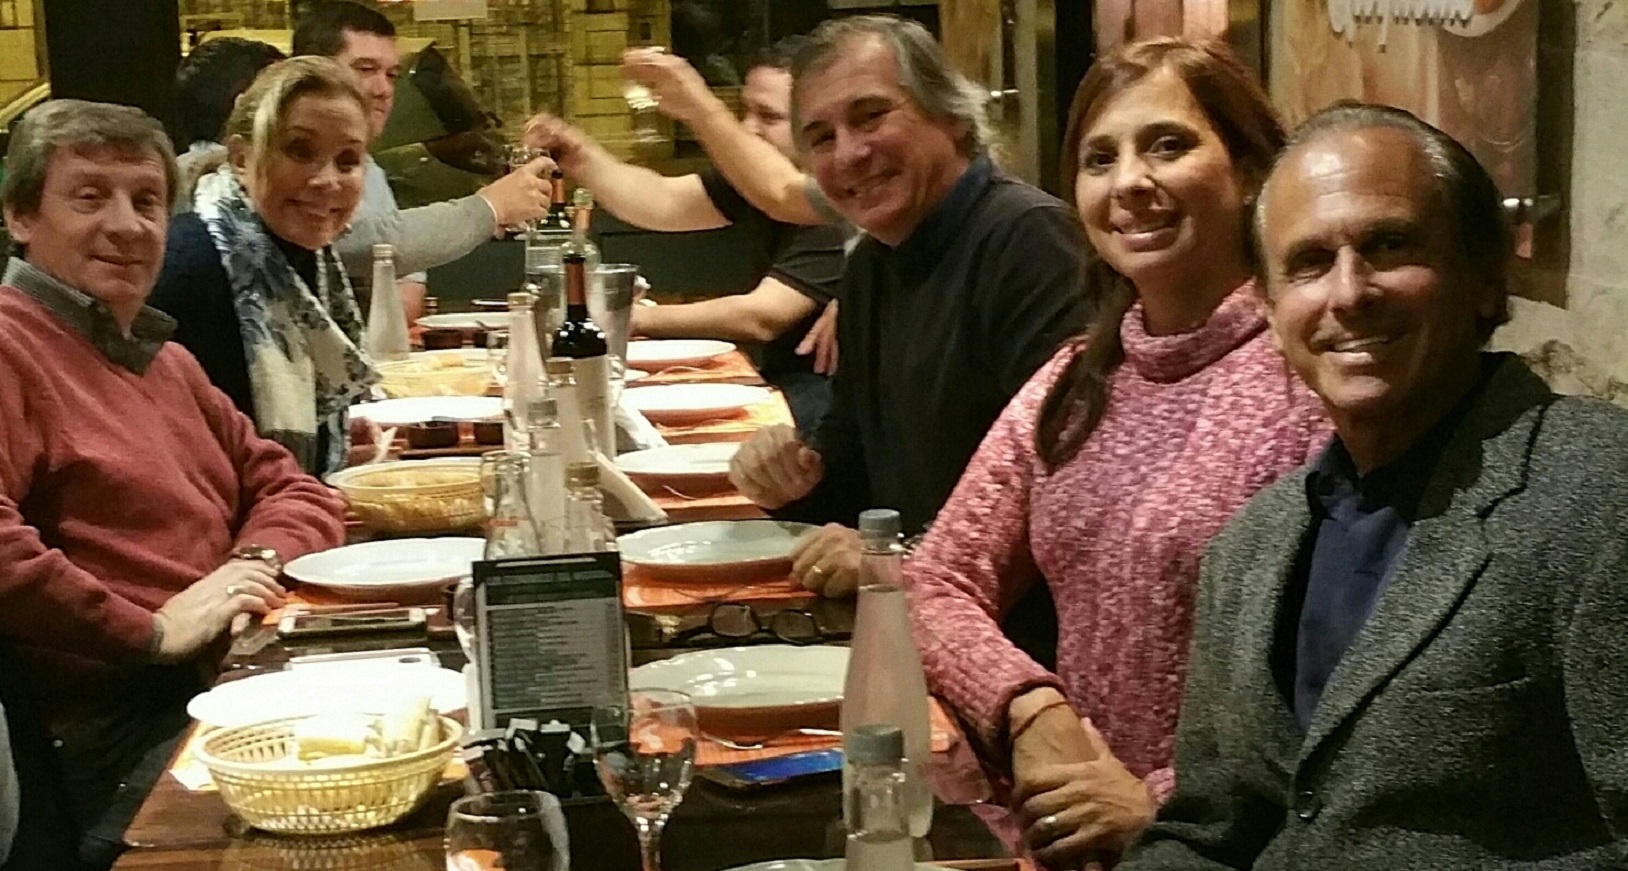 Having fun at a casual group dinner in Rosario Argentina